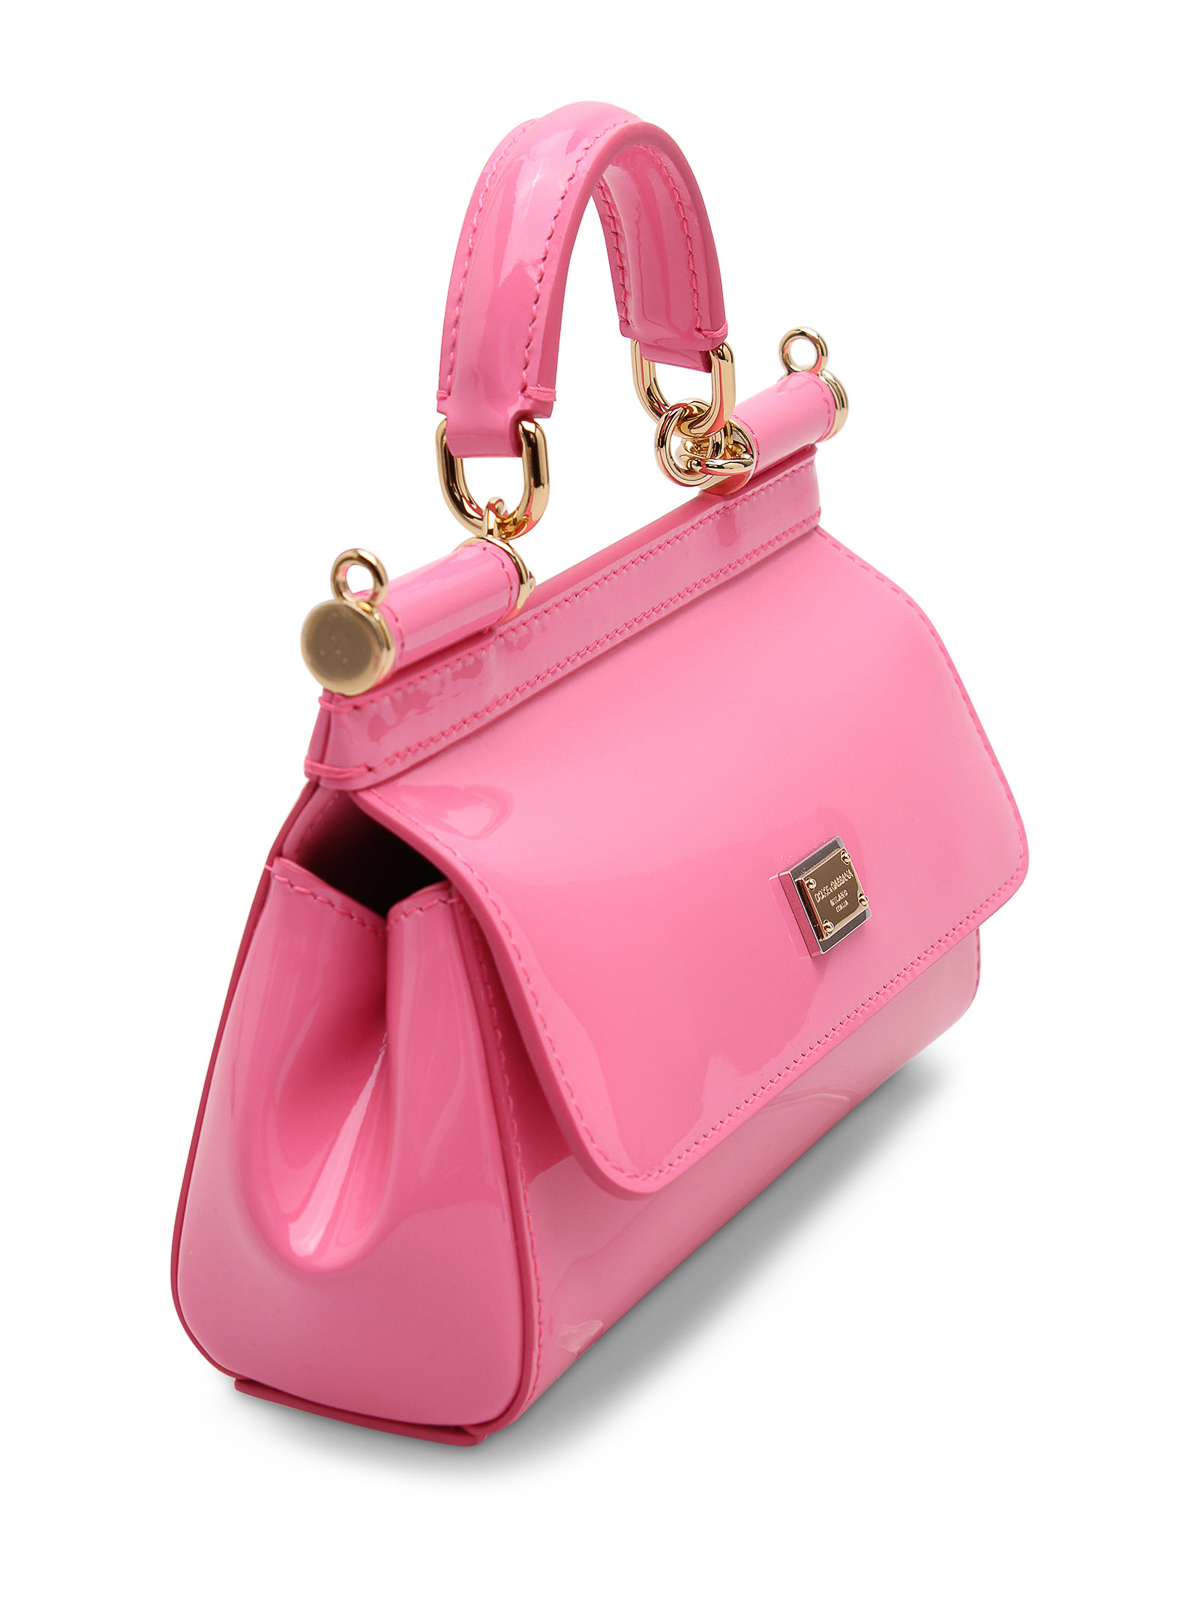 Women's Small 'sicily' Bag by Dolce & Gabbana